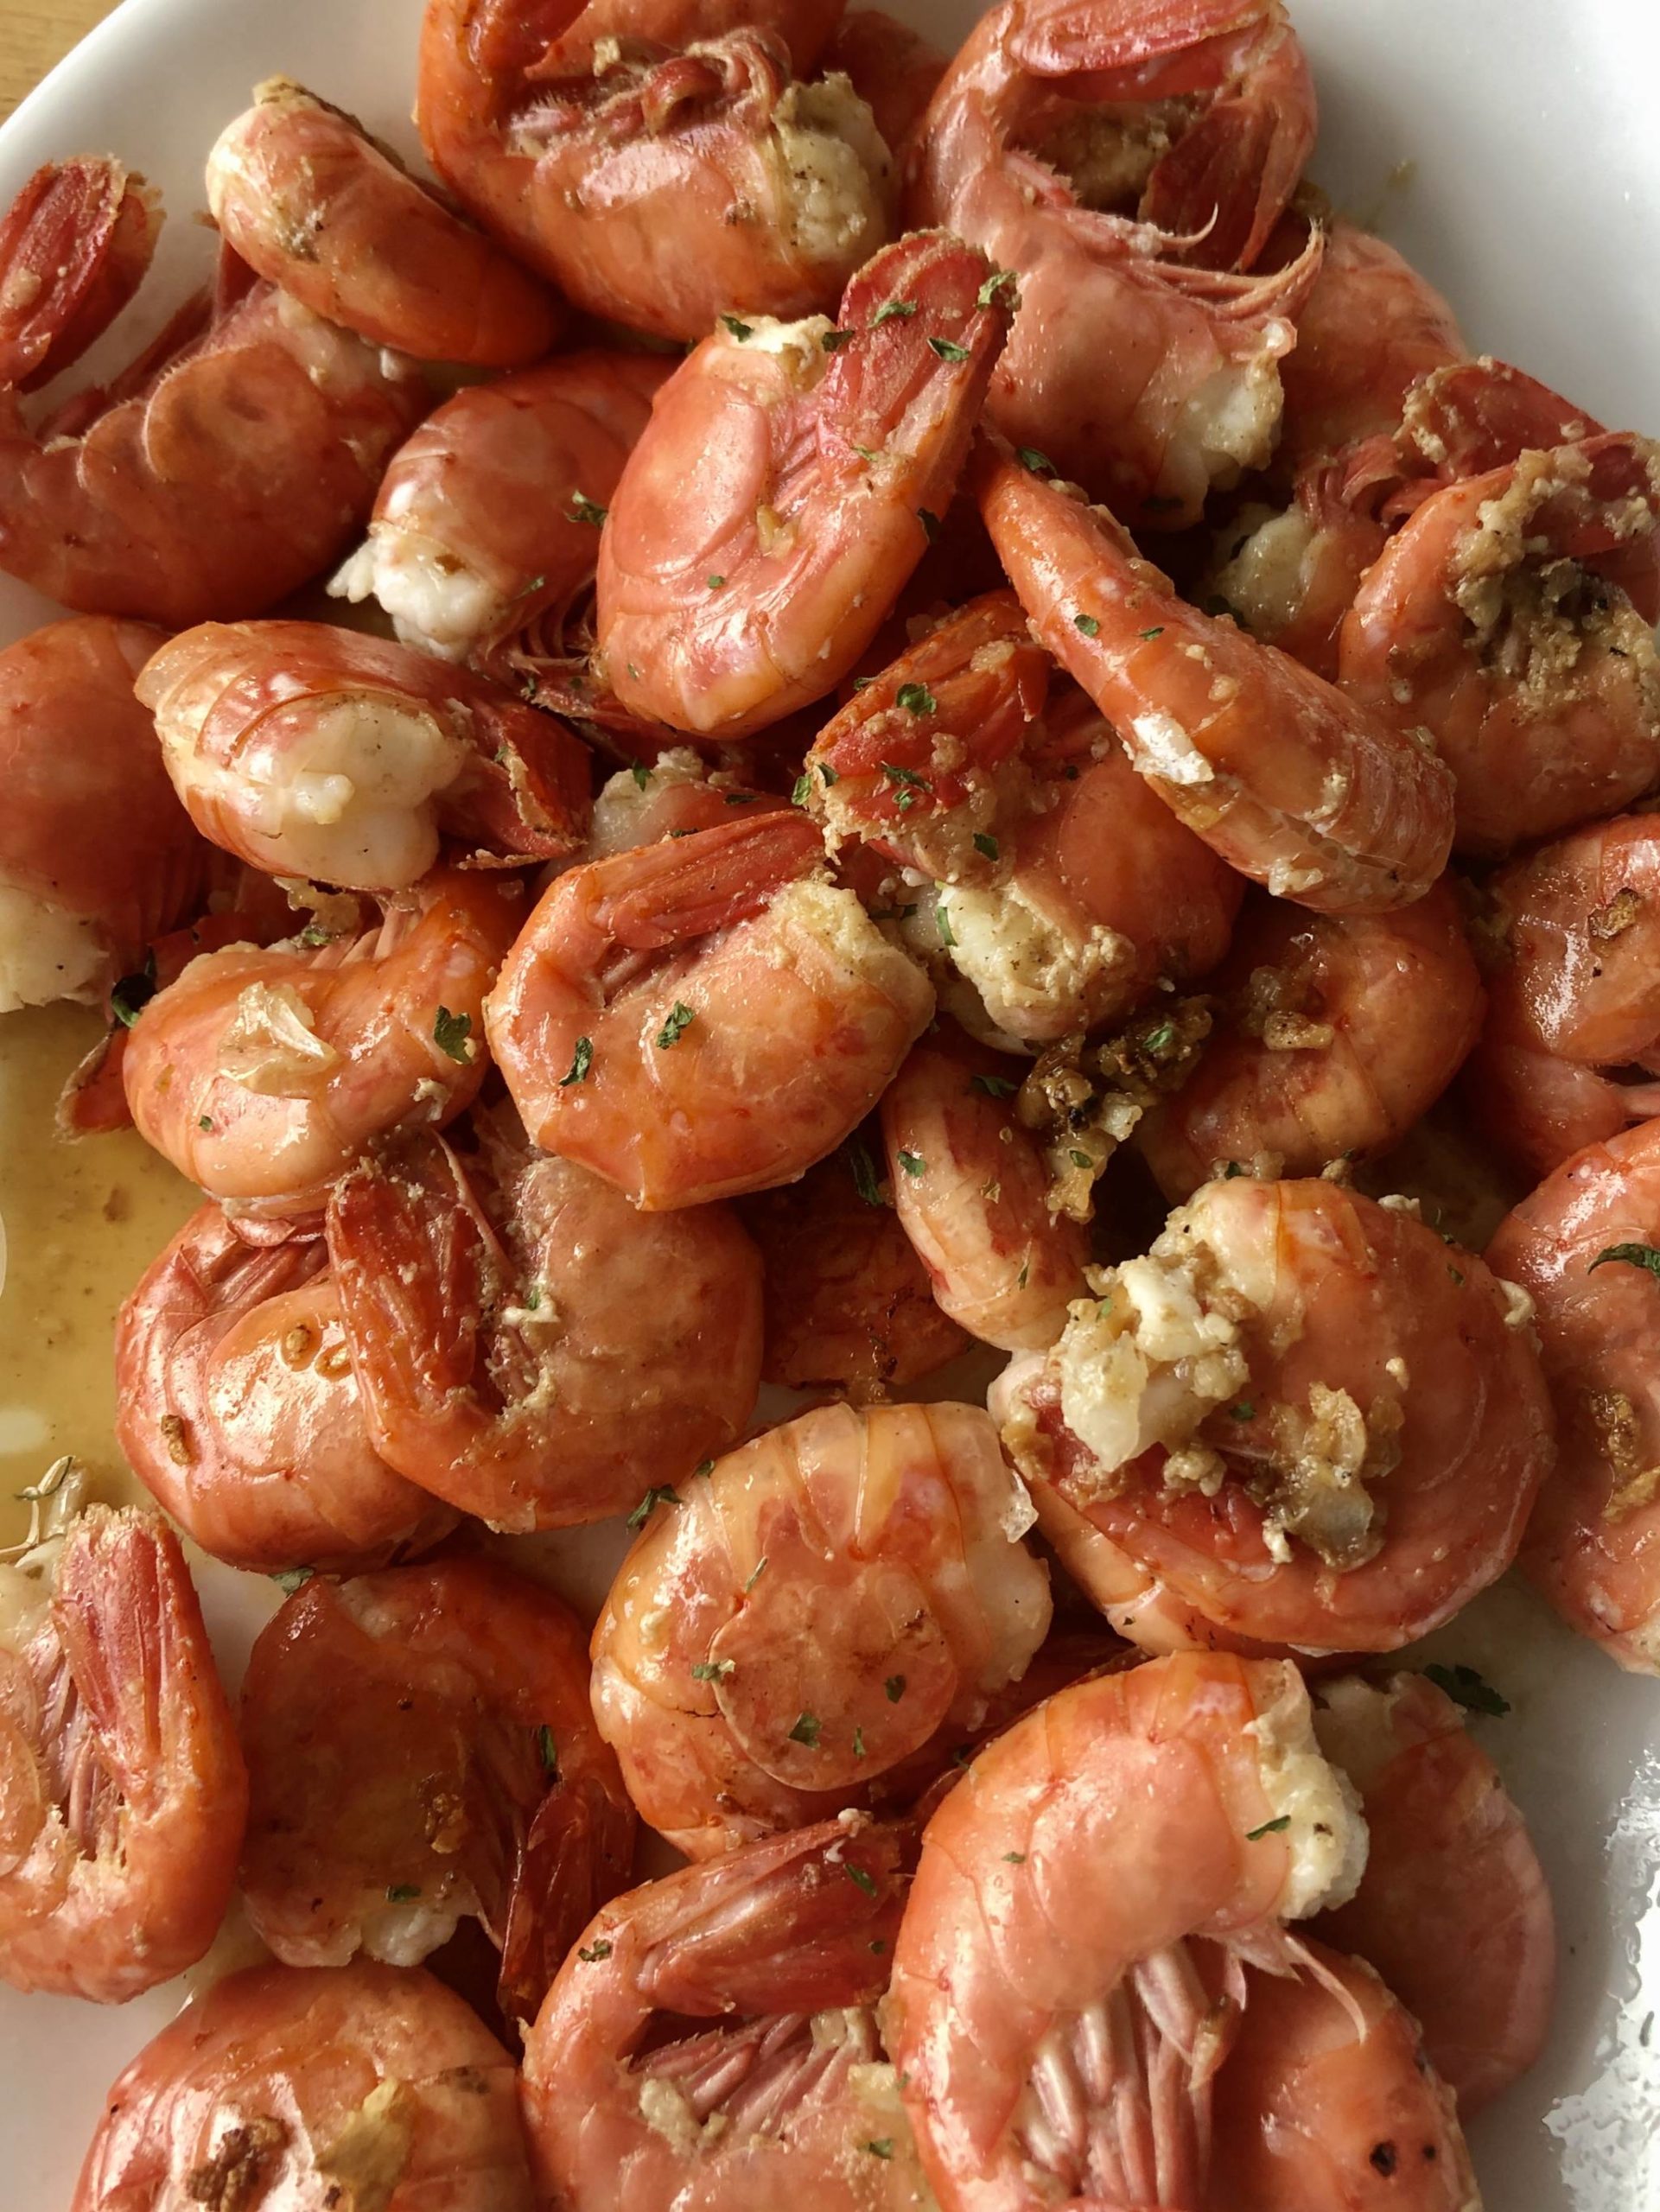 Photo by Emily Gilbert/Whidbey News-Times
Chopped garlic, butter, parsley, and a little salt is a tasty way to saute some fresh-caught spot shrimp.